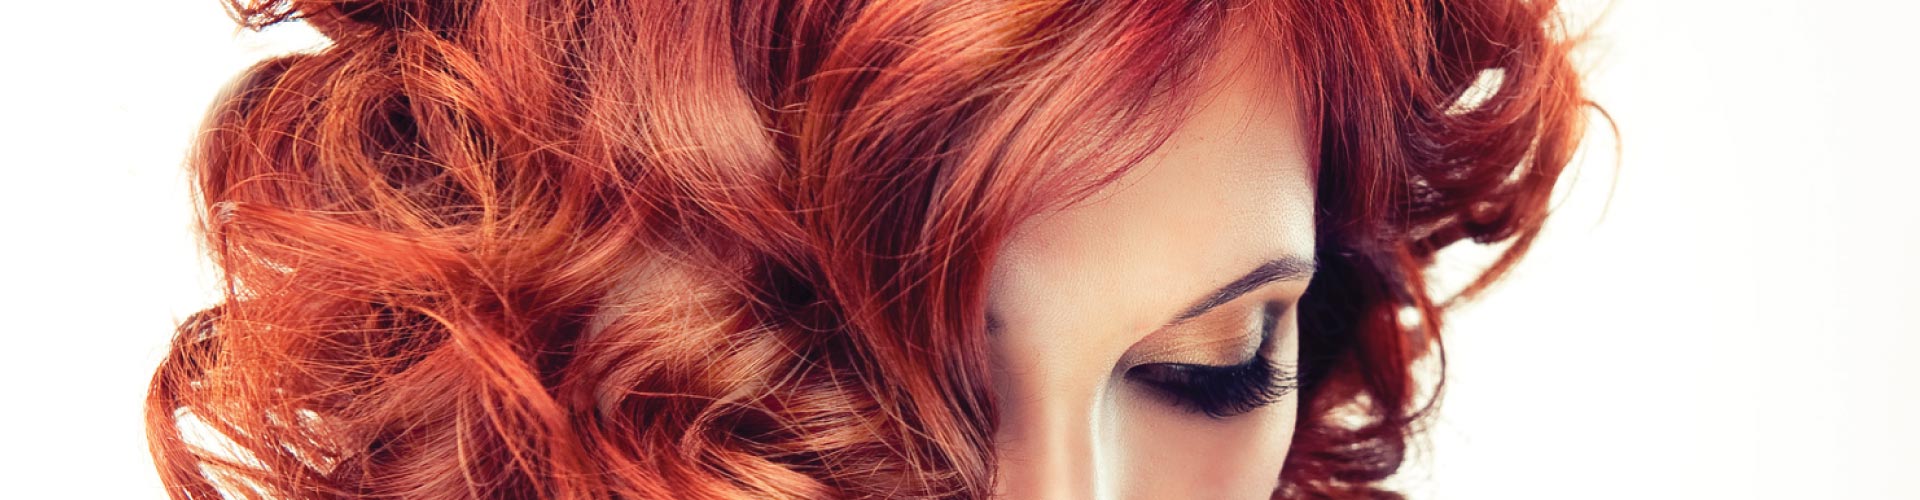 woman with beautiful styled red hair